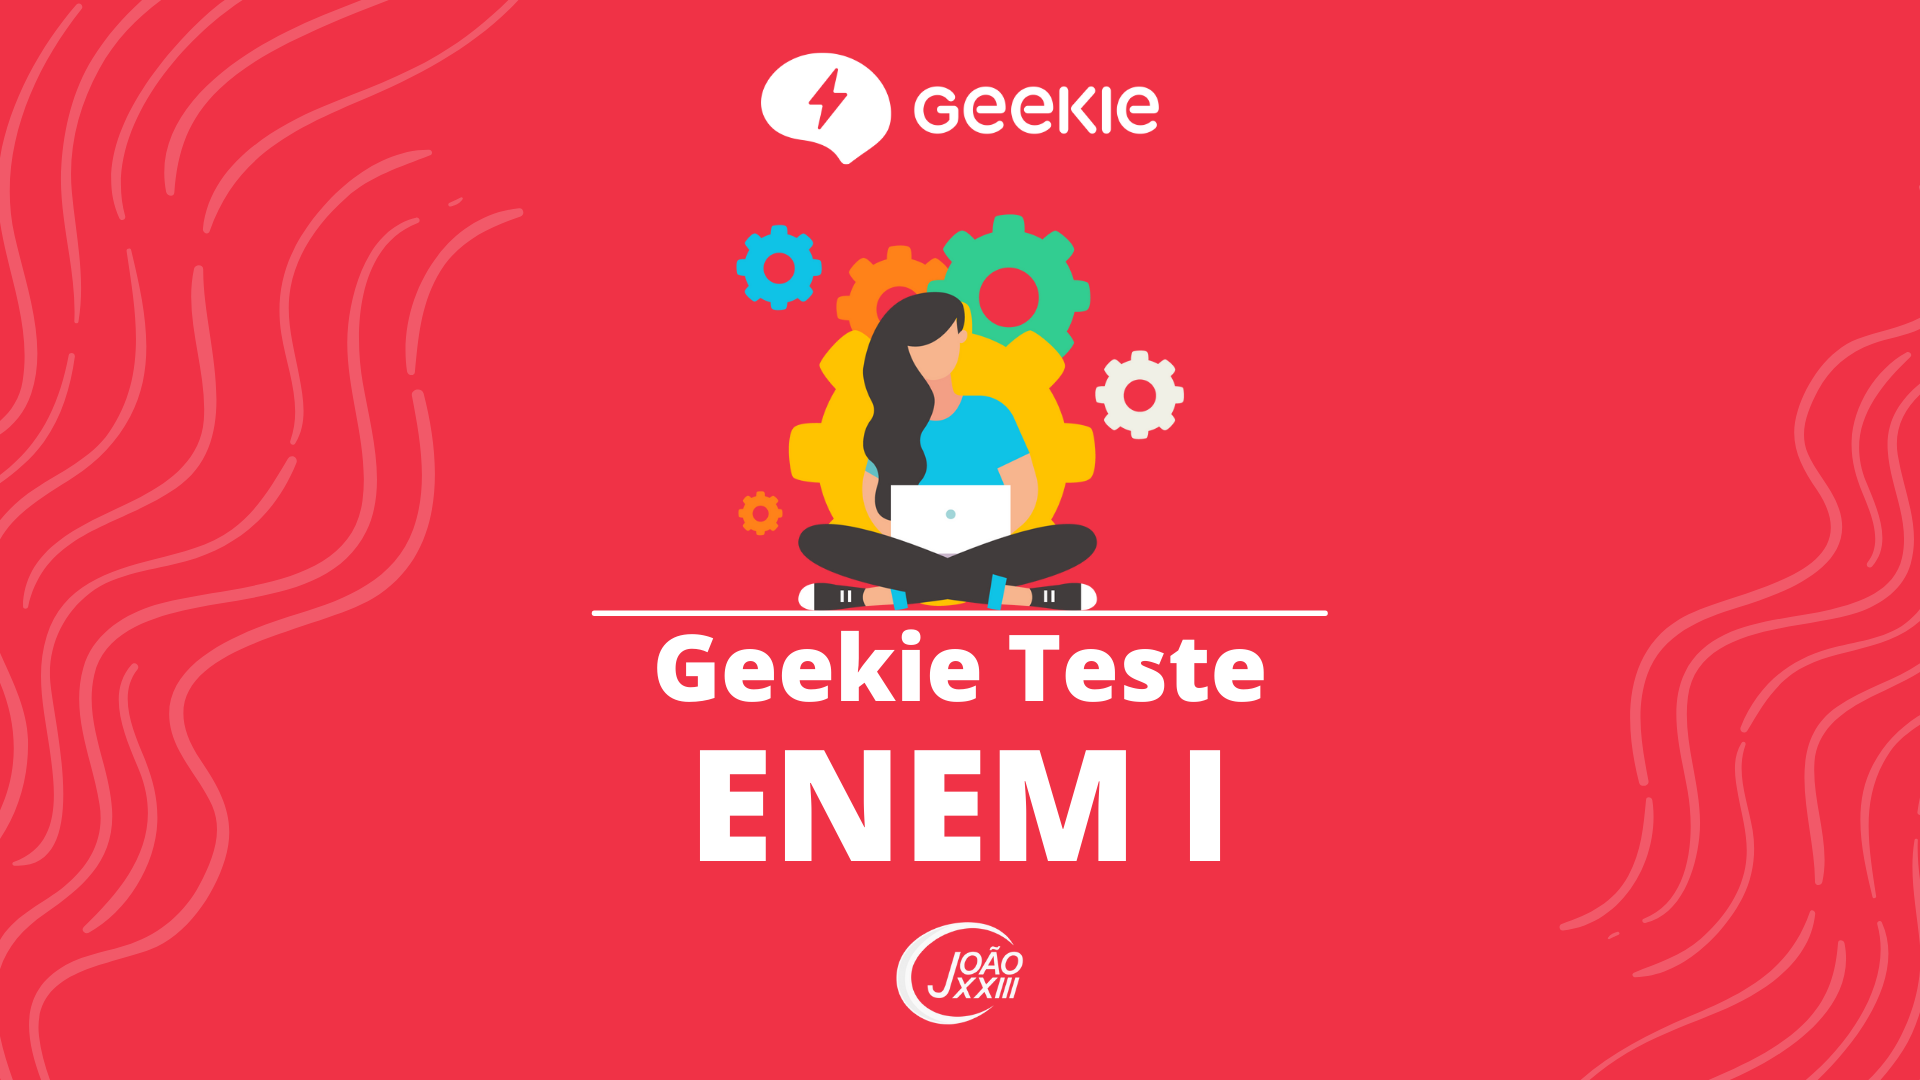 You are currently viewing Geekie Teste ENEM I